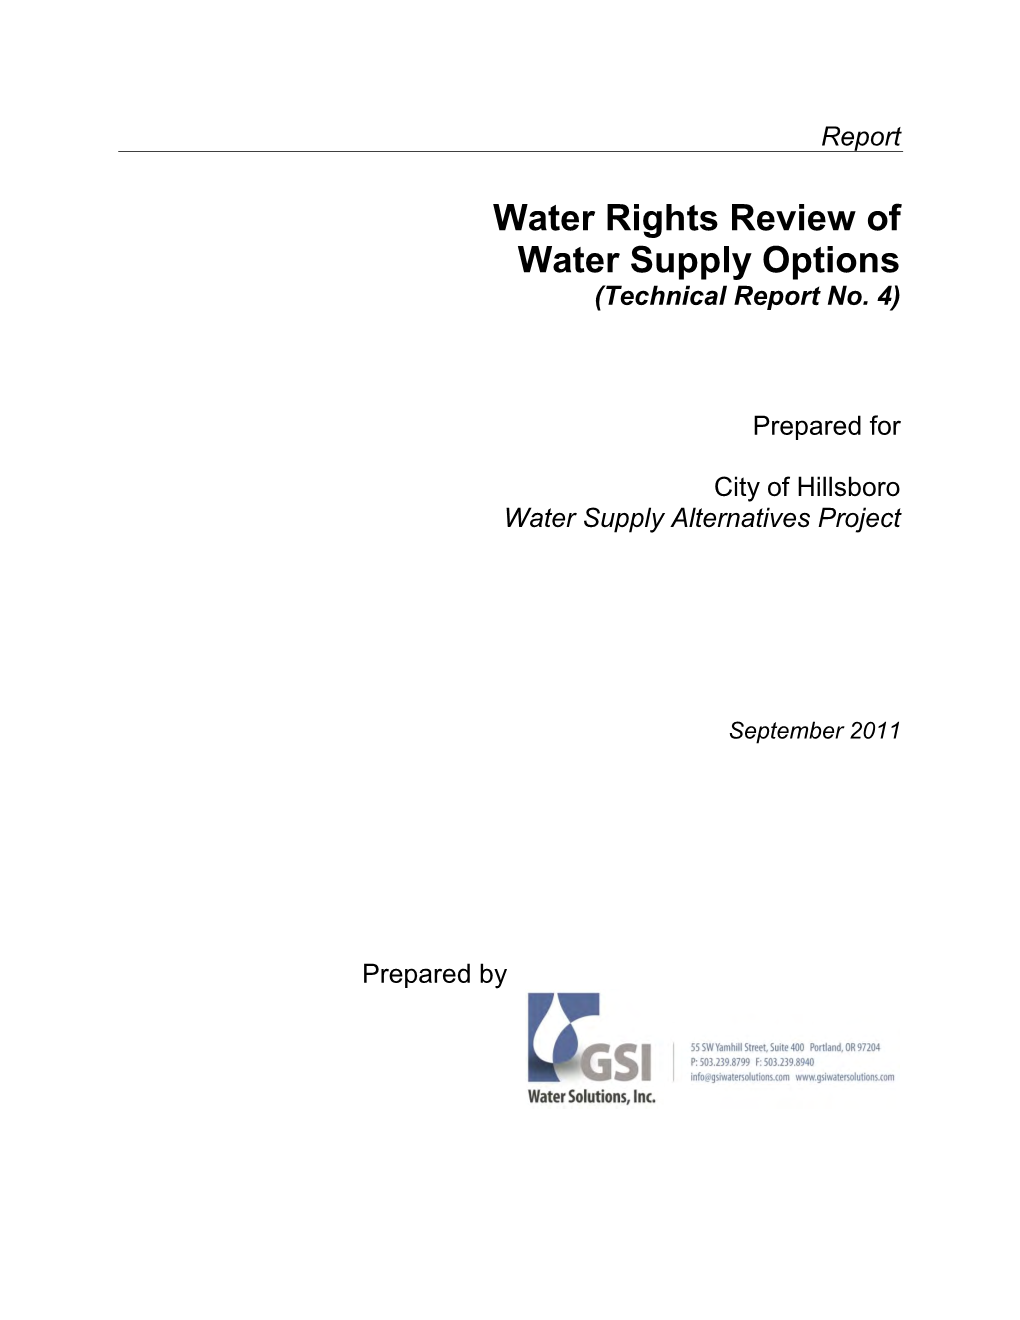 Water Rights Review of Water Supply Options (Technical Report No